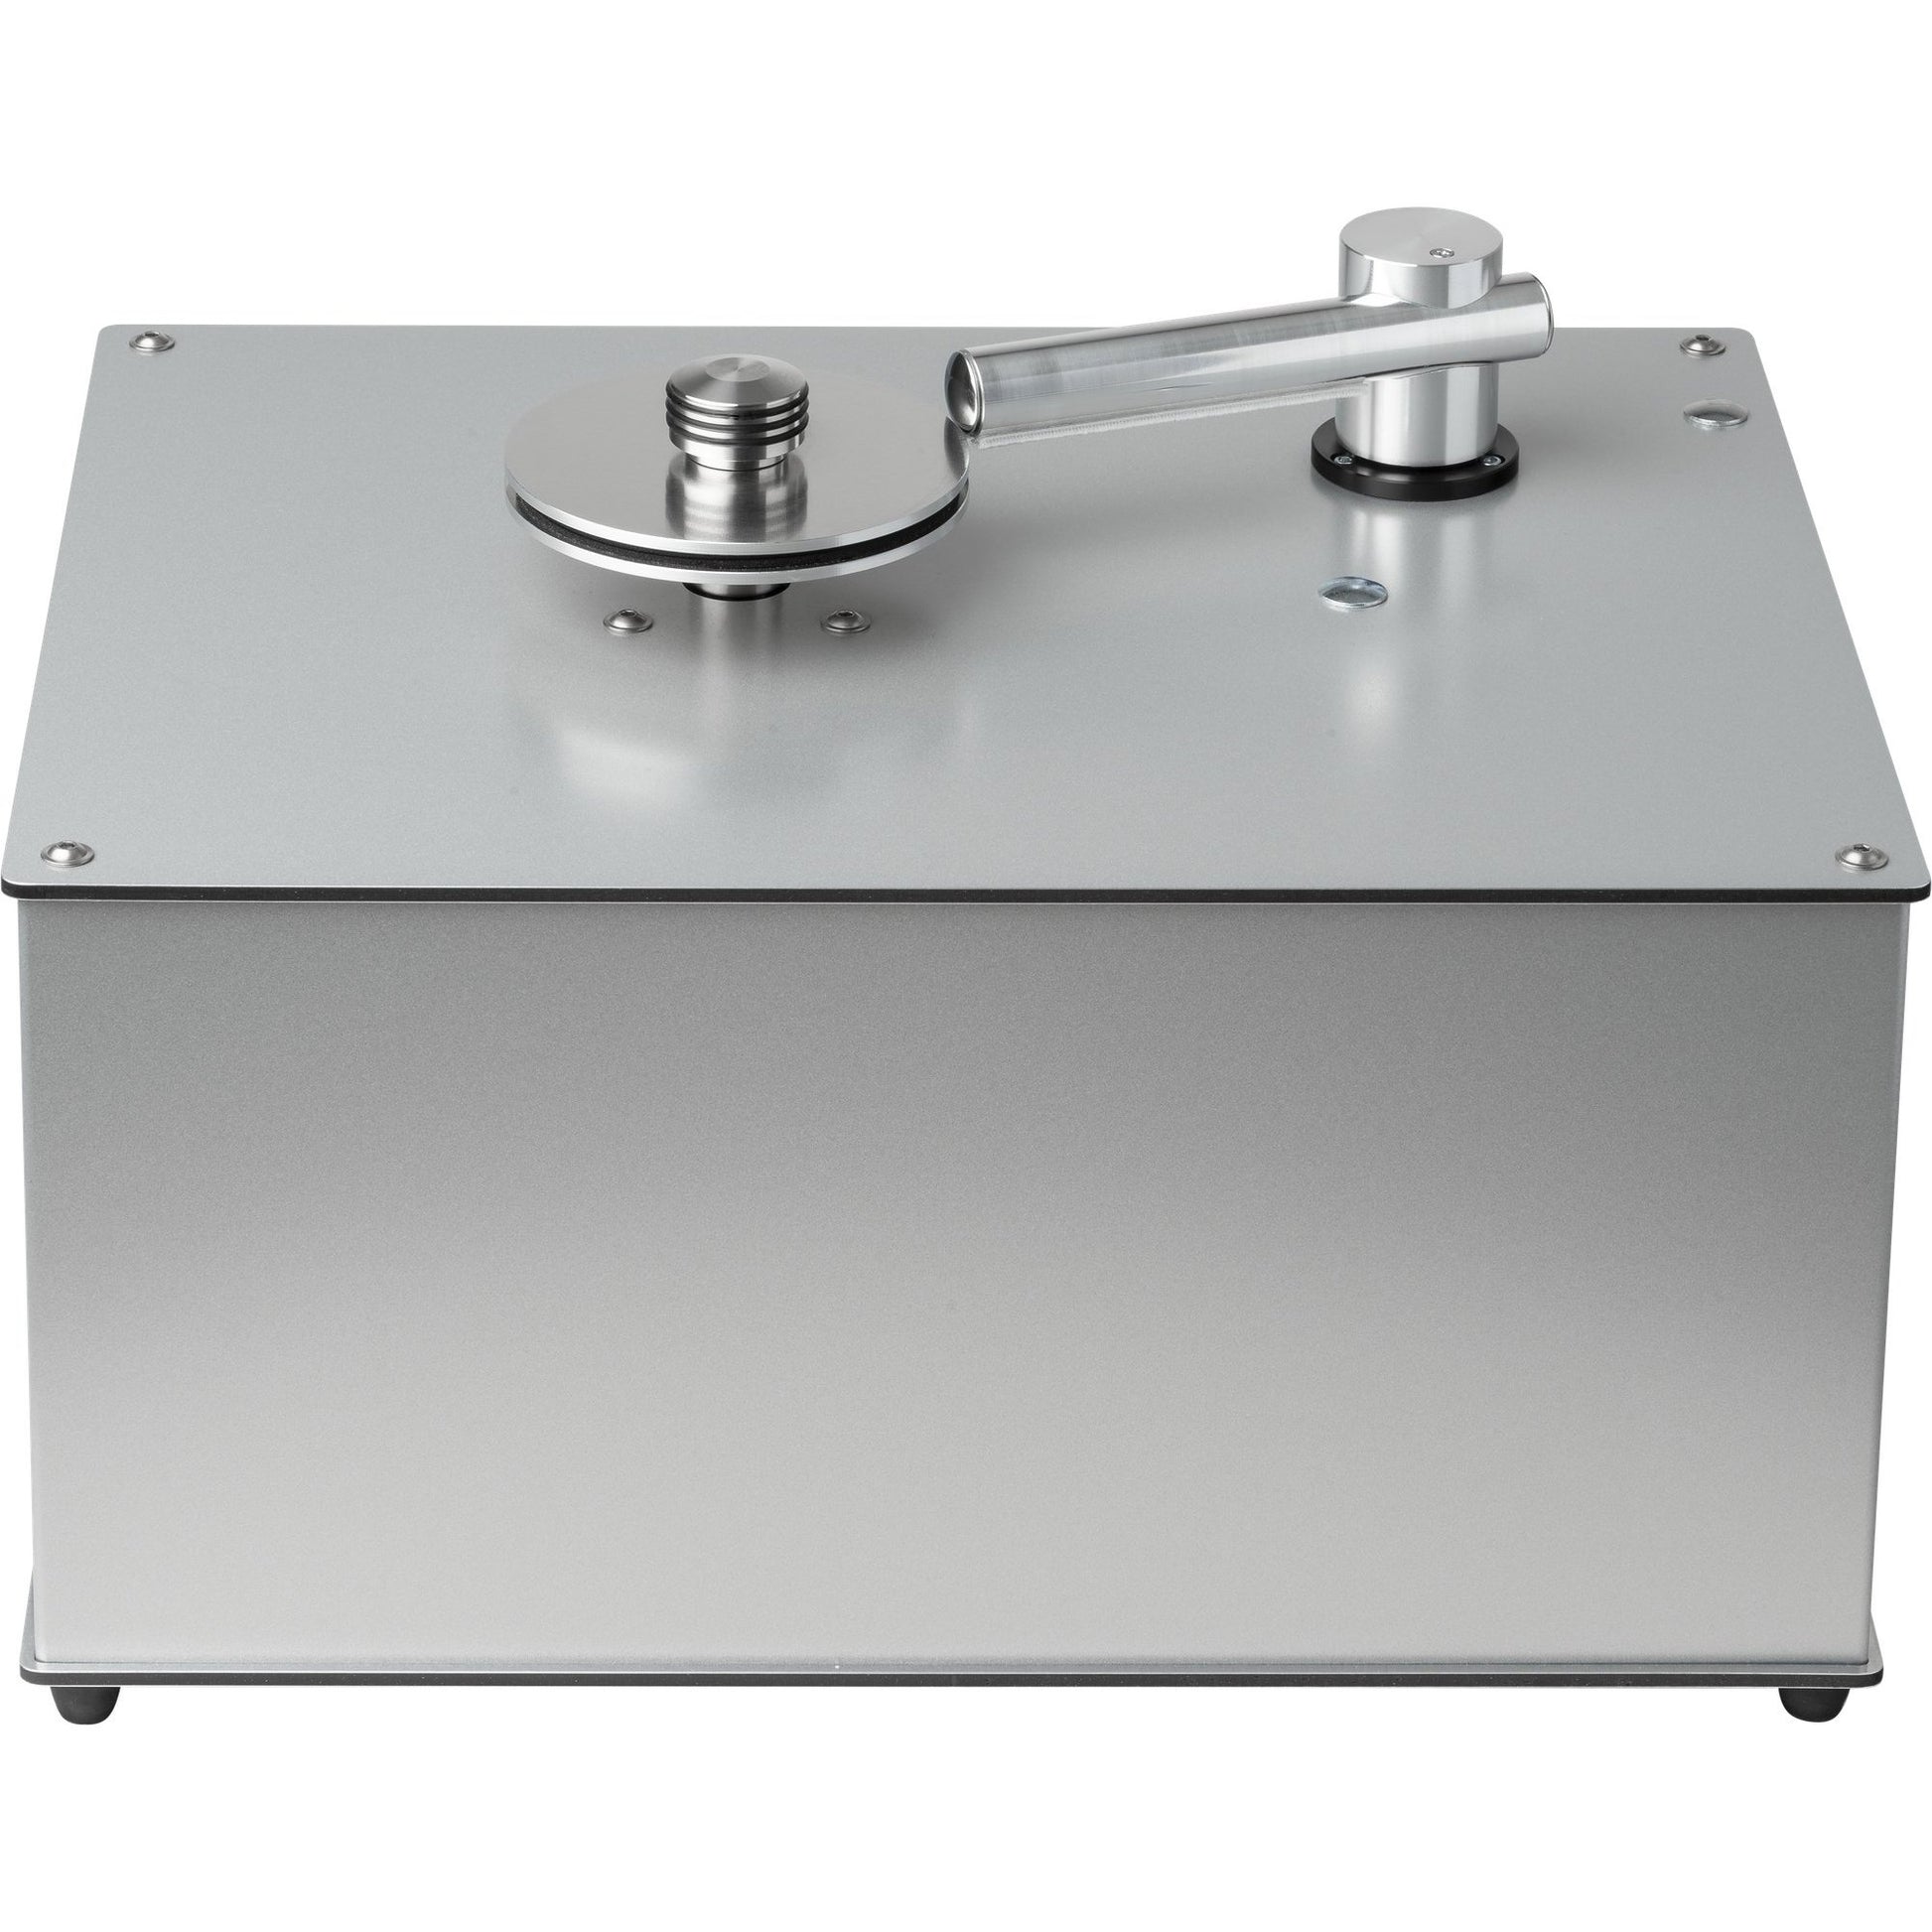 VC-S2 Premium Record Cleaning Machine-Pro-Ject-Mood